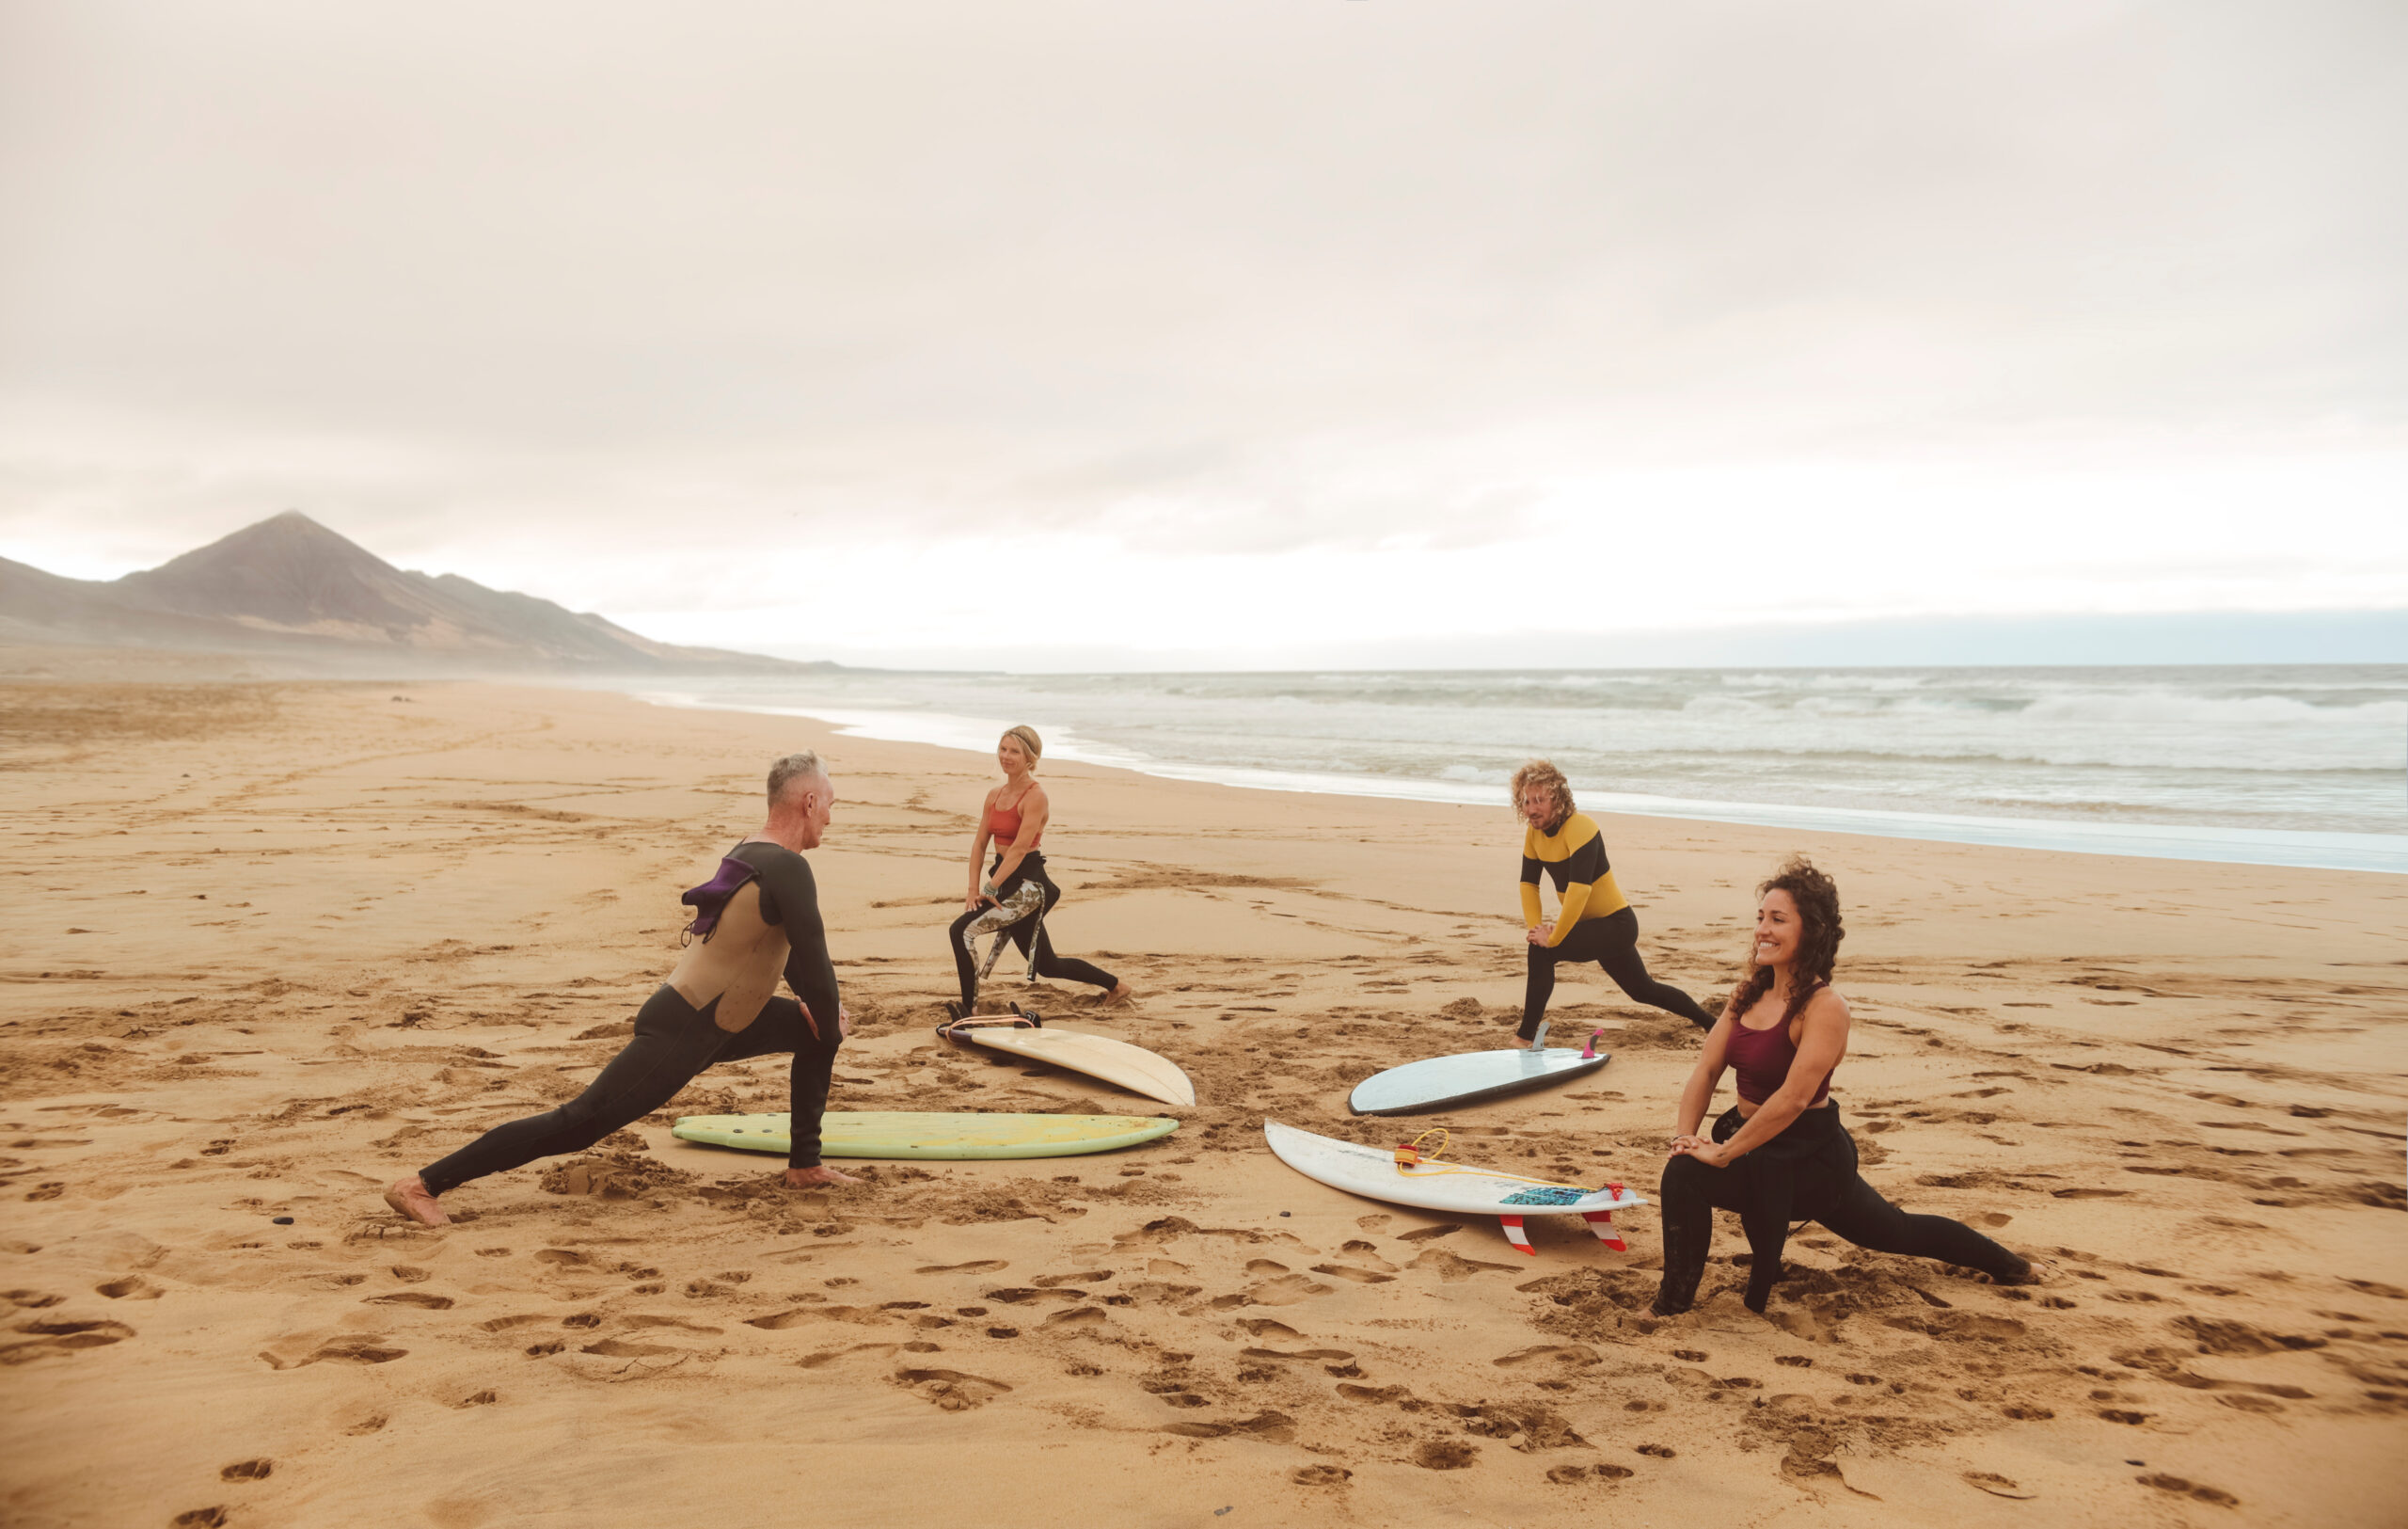 Group of people stretching at the beach, before starting a surf session. - Sportive people warming up before going in the water.